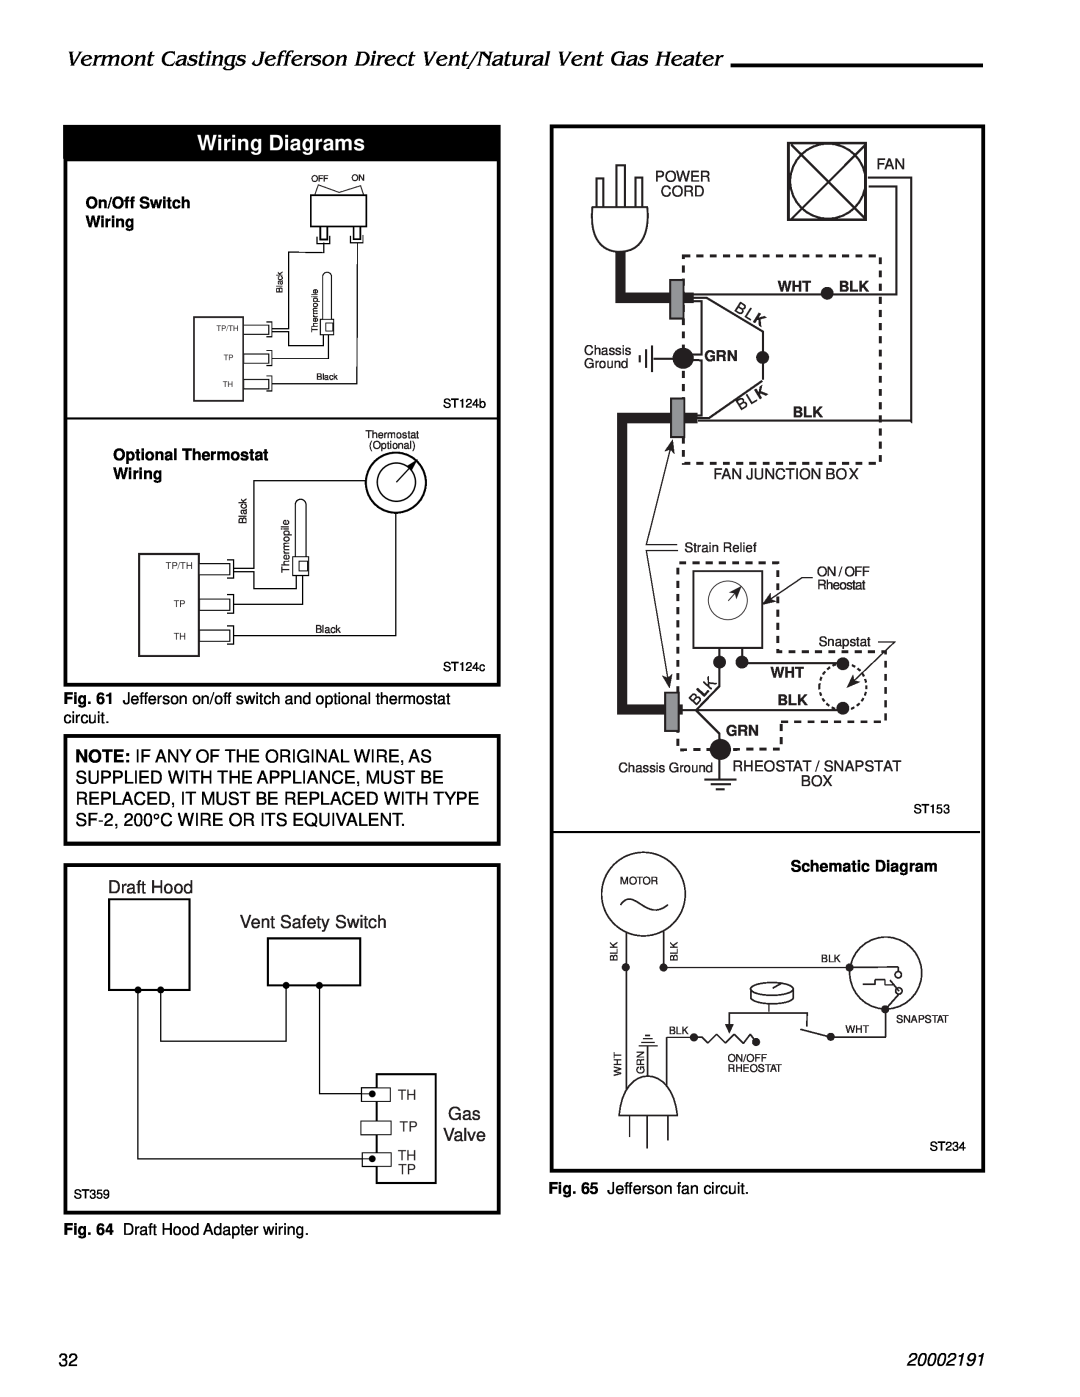 Vermont Casting 2823 Wiring Diagrams, Draft Hood Vent Safety Switch, Valve, 20002191, Schematic Diagram, Fan Power Cord 